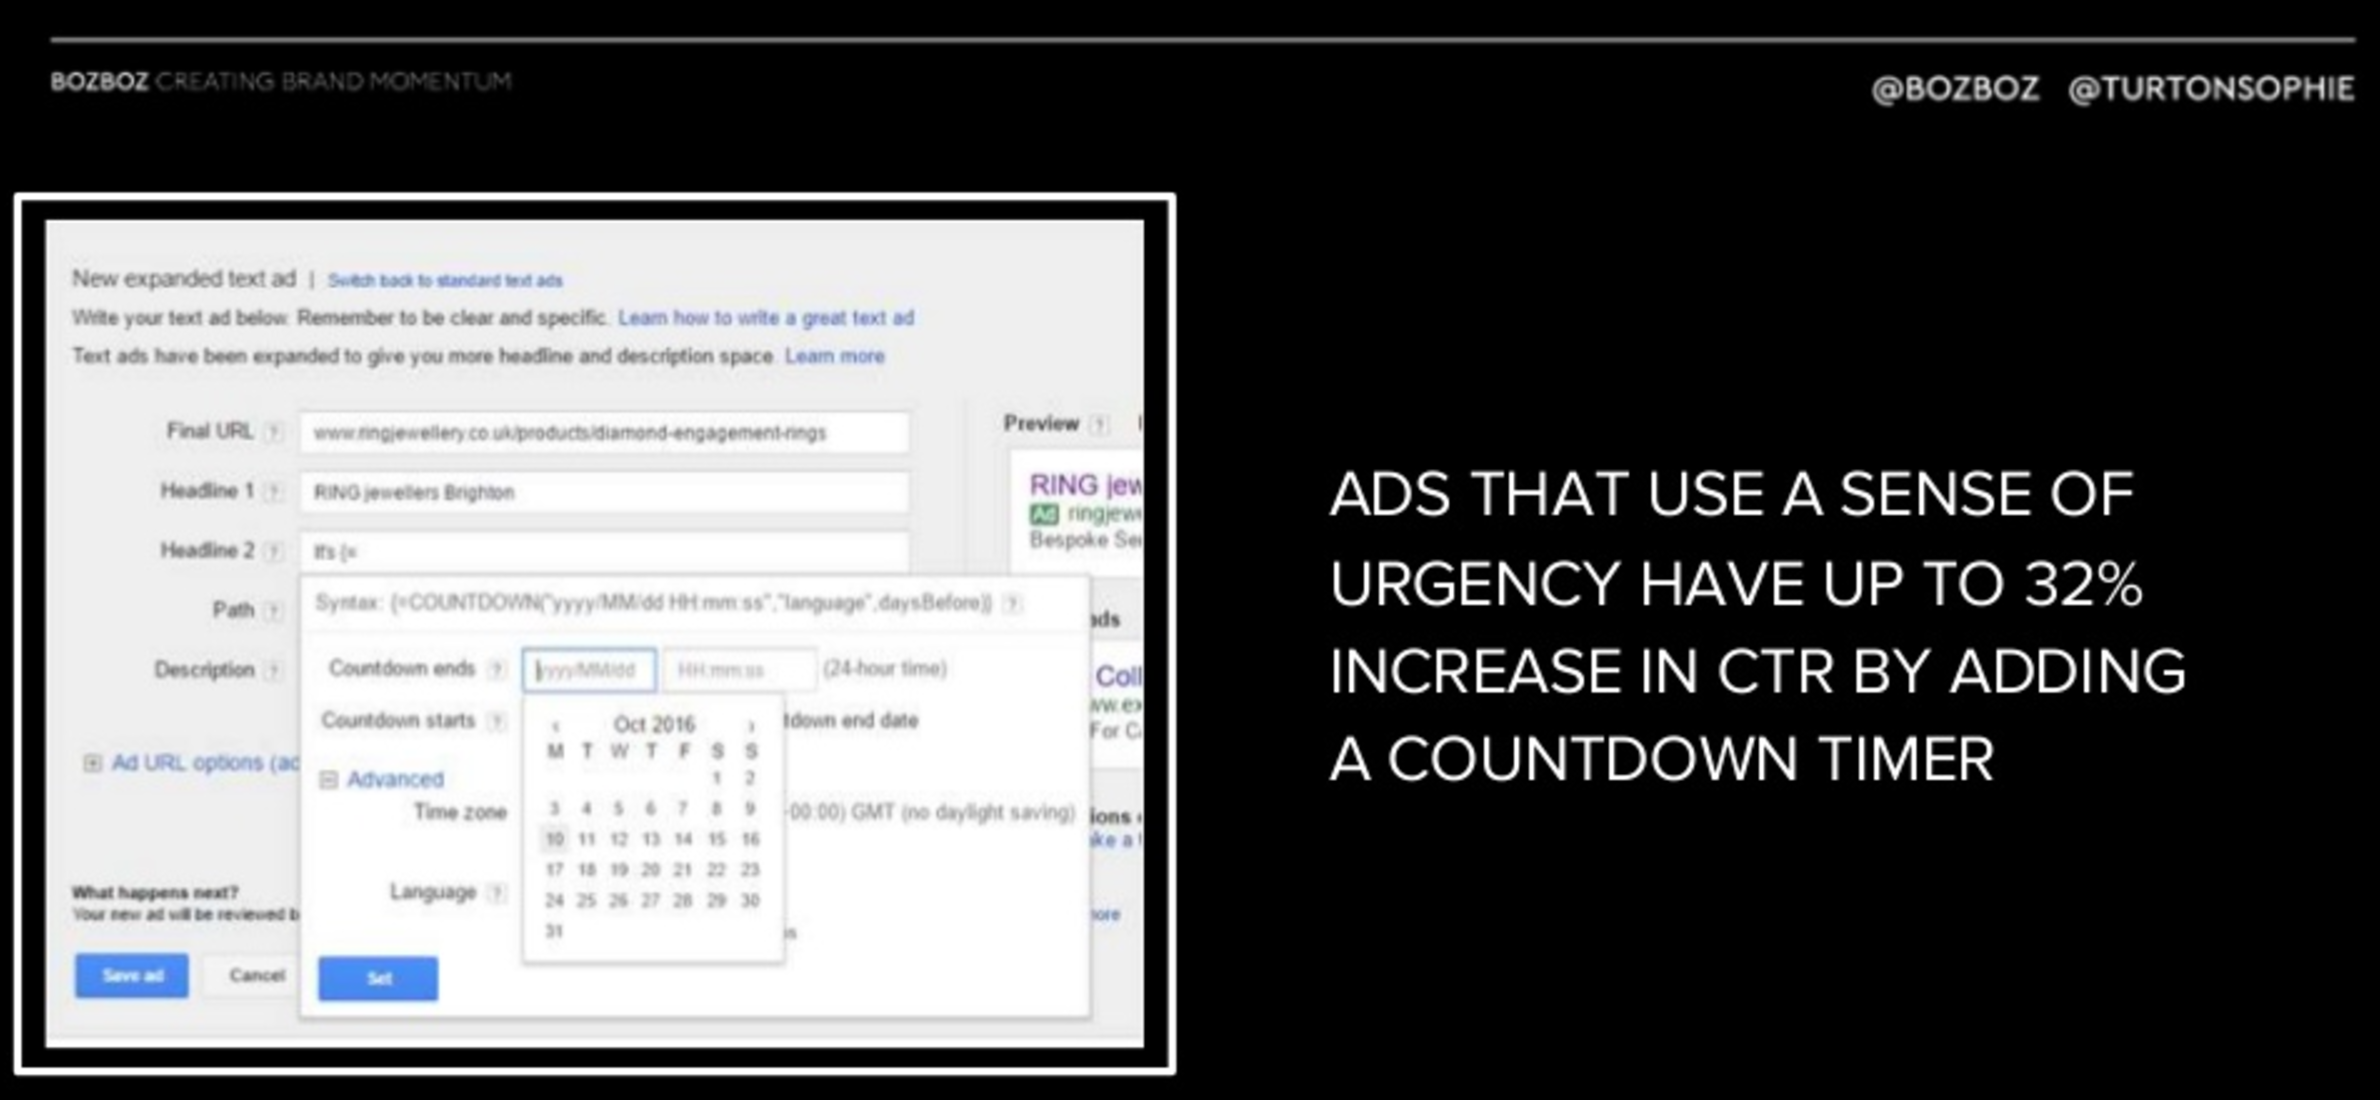 A sense of urgency can increase an ad s effectiveness – this also plays into the FOMO Fear of Missing Out effect